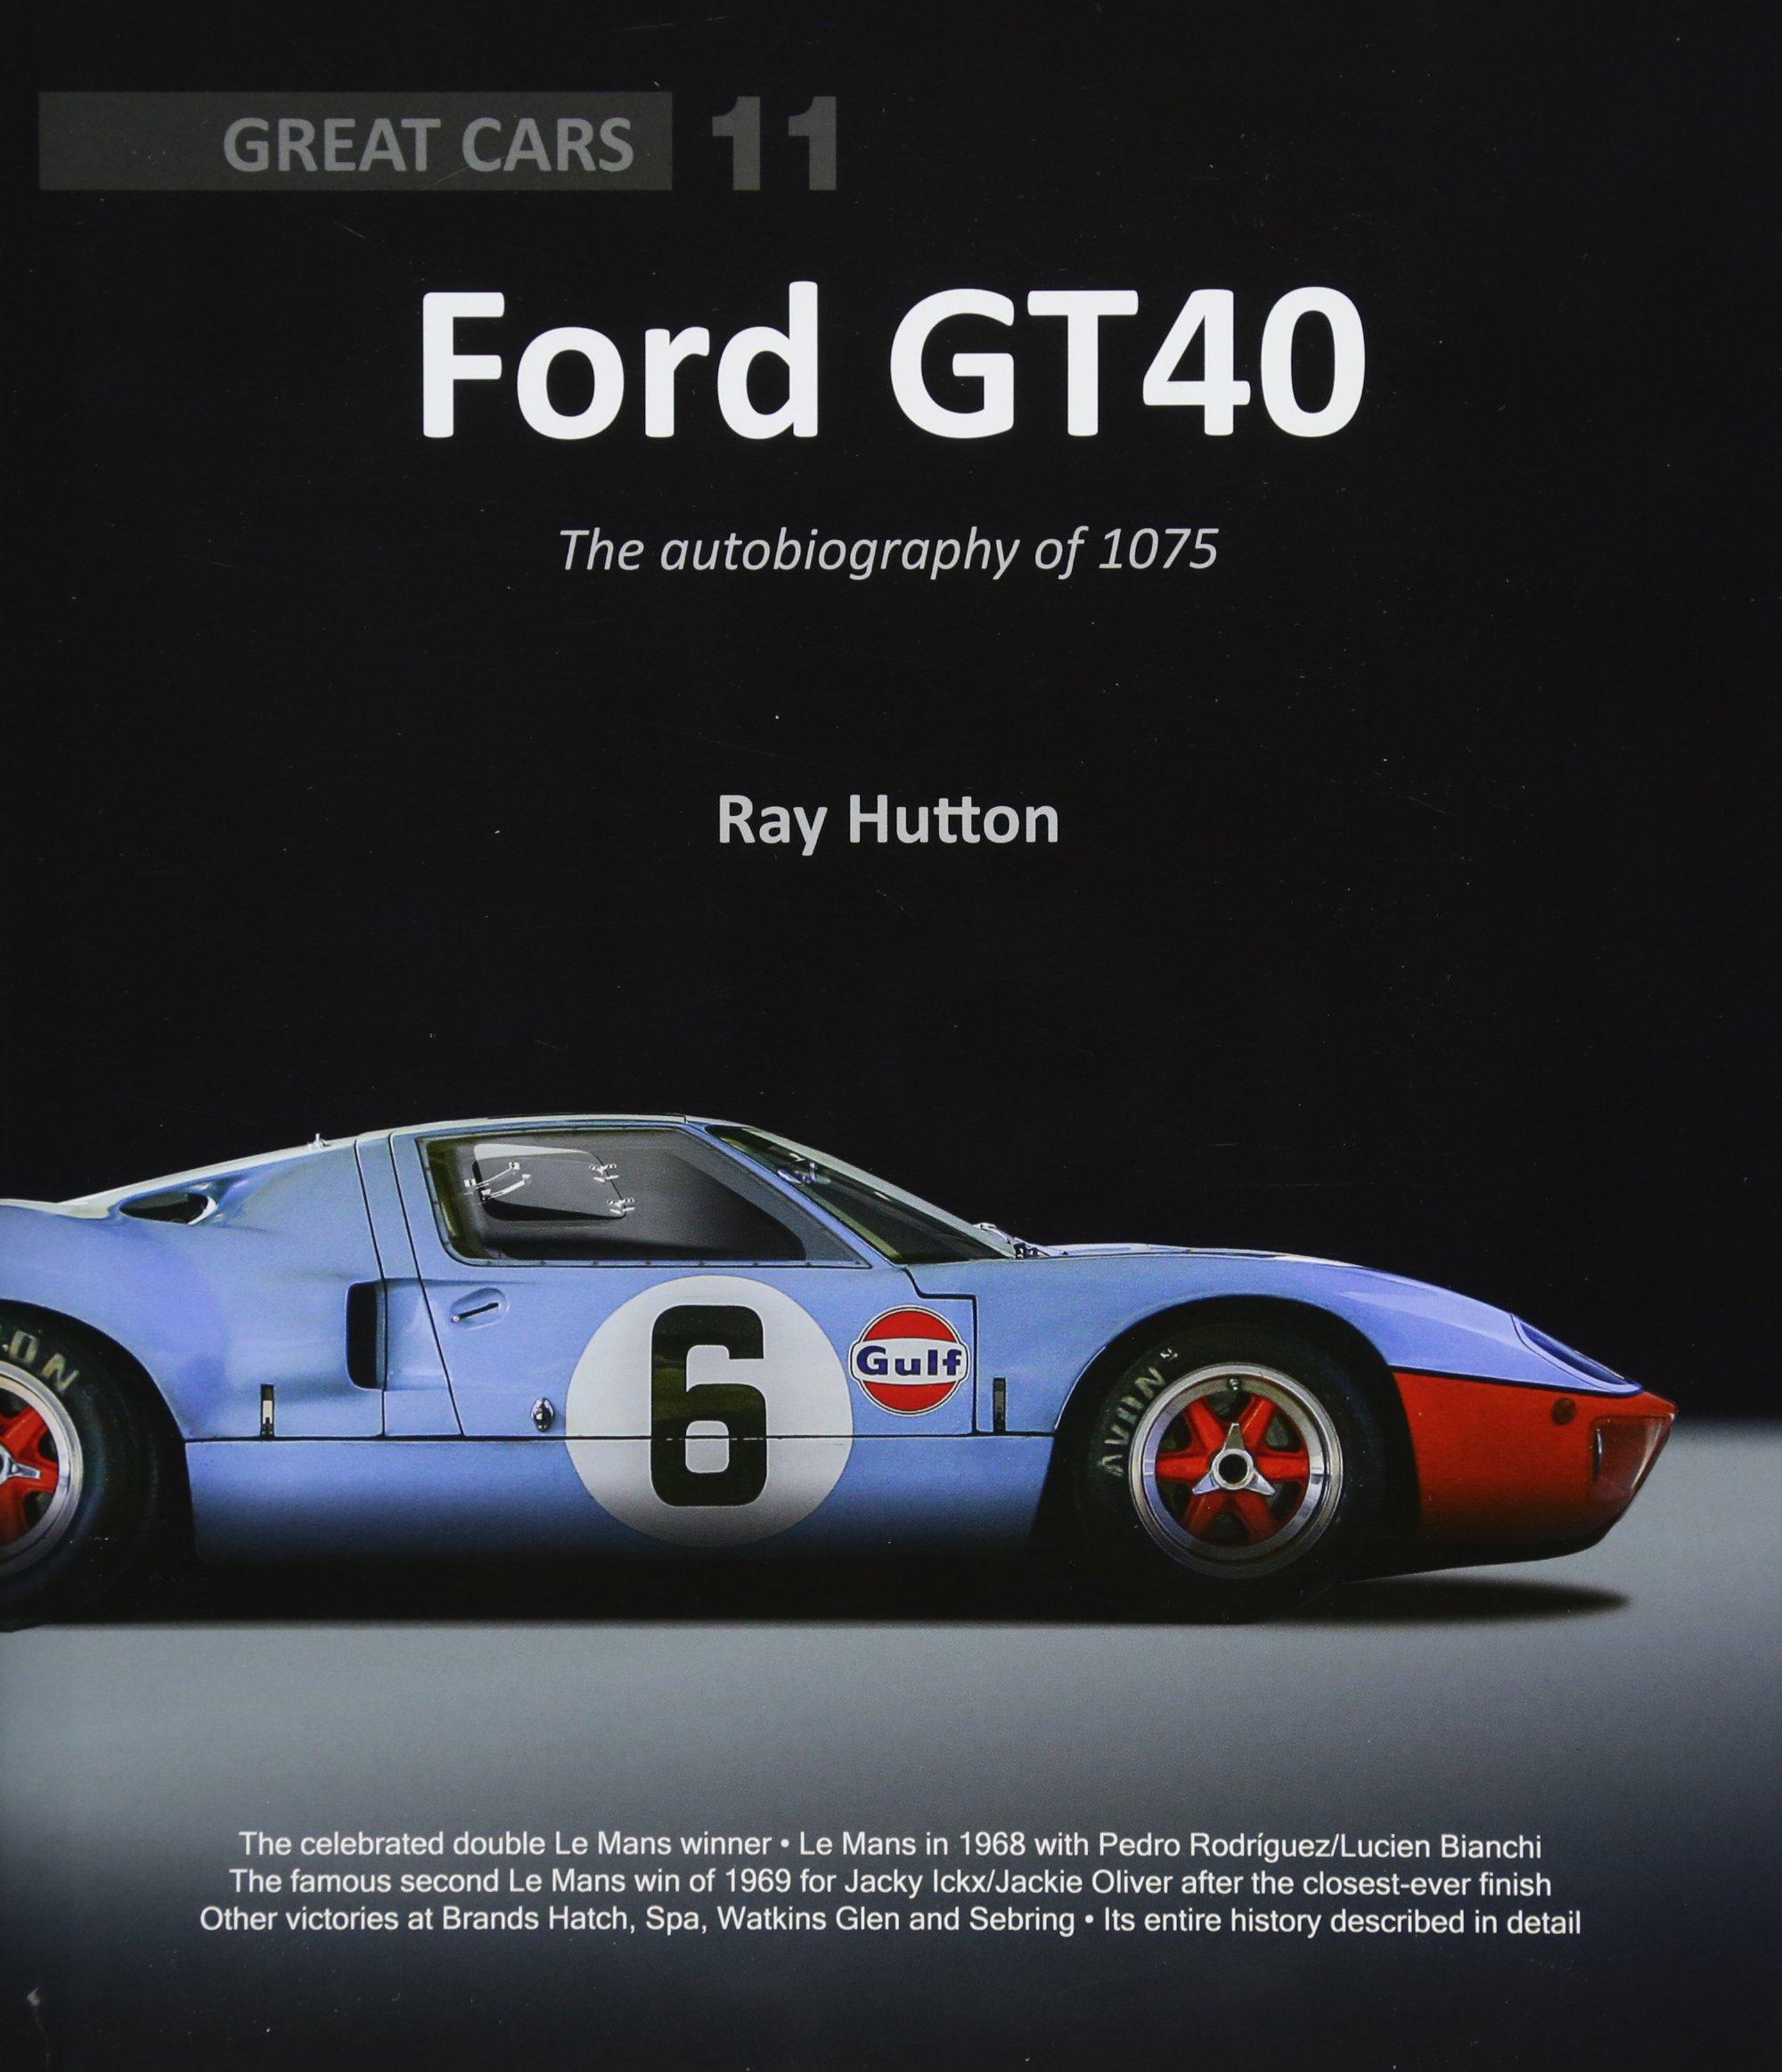 Ford GT40: The autobiography of 1075 (Great Cars): Ray Hutton